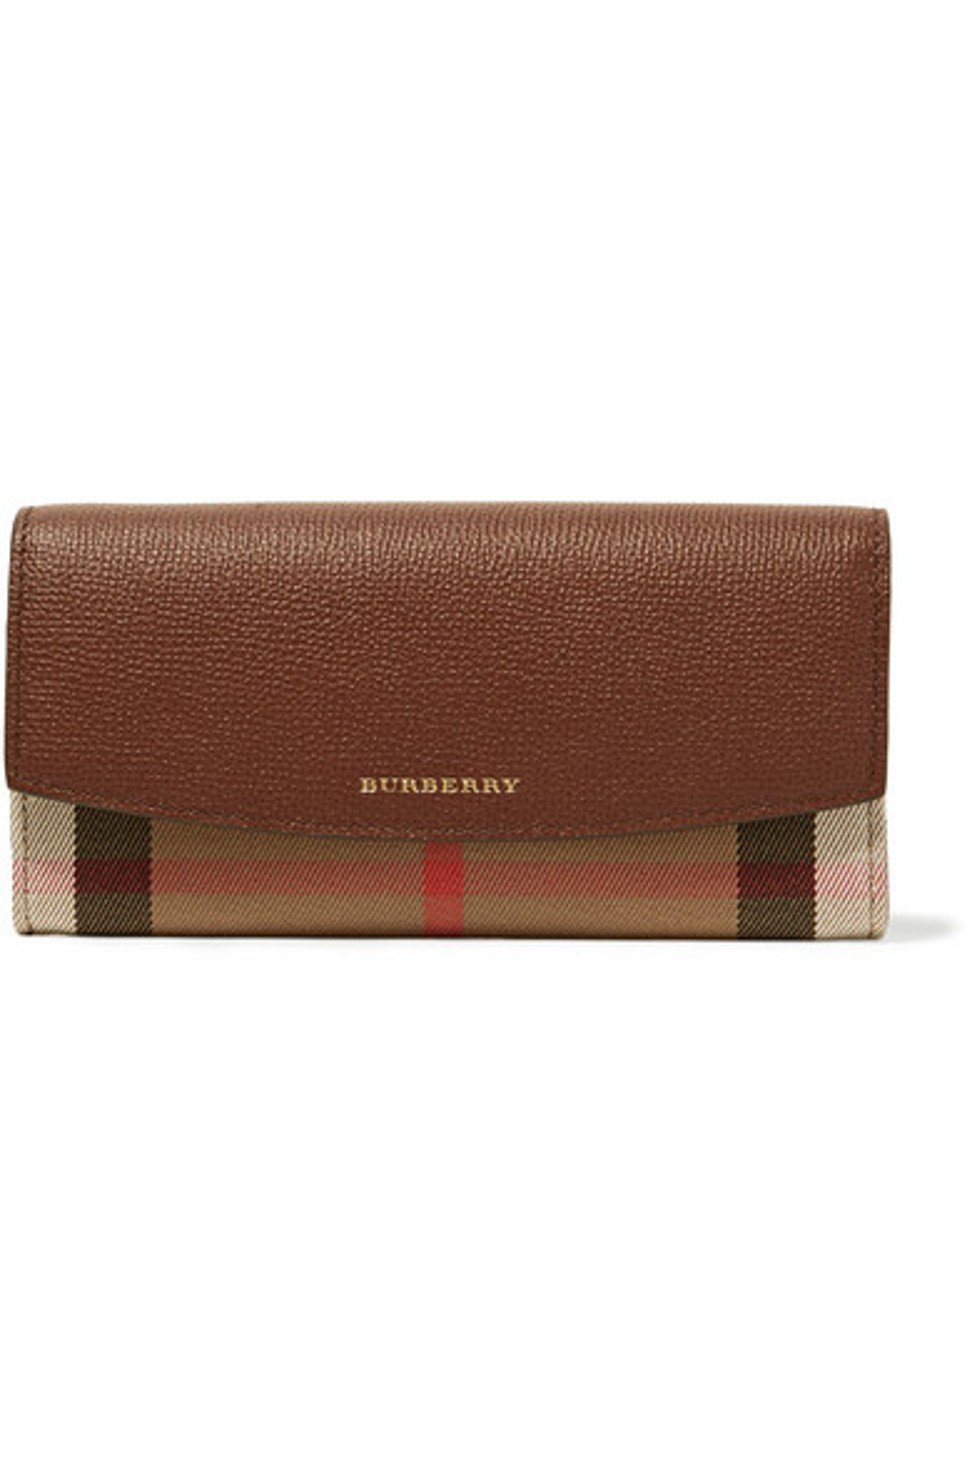 Thierry Chow says those born in the Year of the Rabbit, Horse or Tiger should get a brown wallet such as the Burberry purse if they want good fortune in the Year of the Dog. 